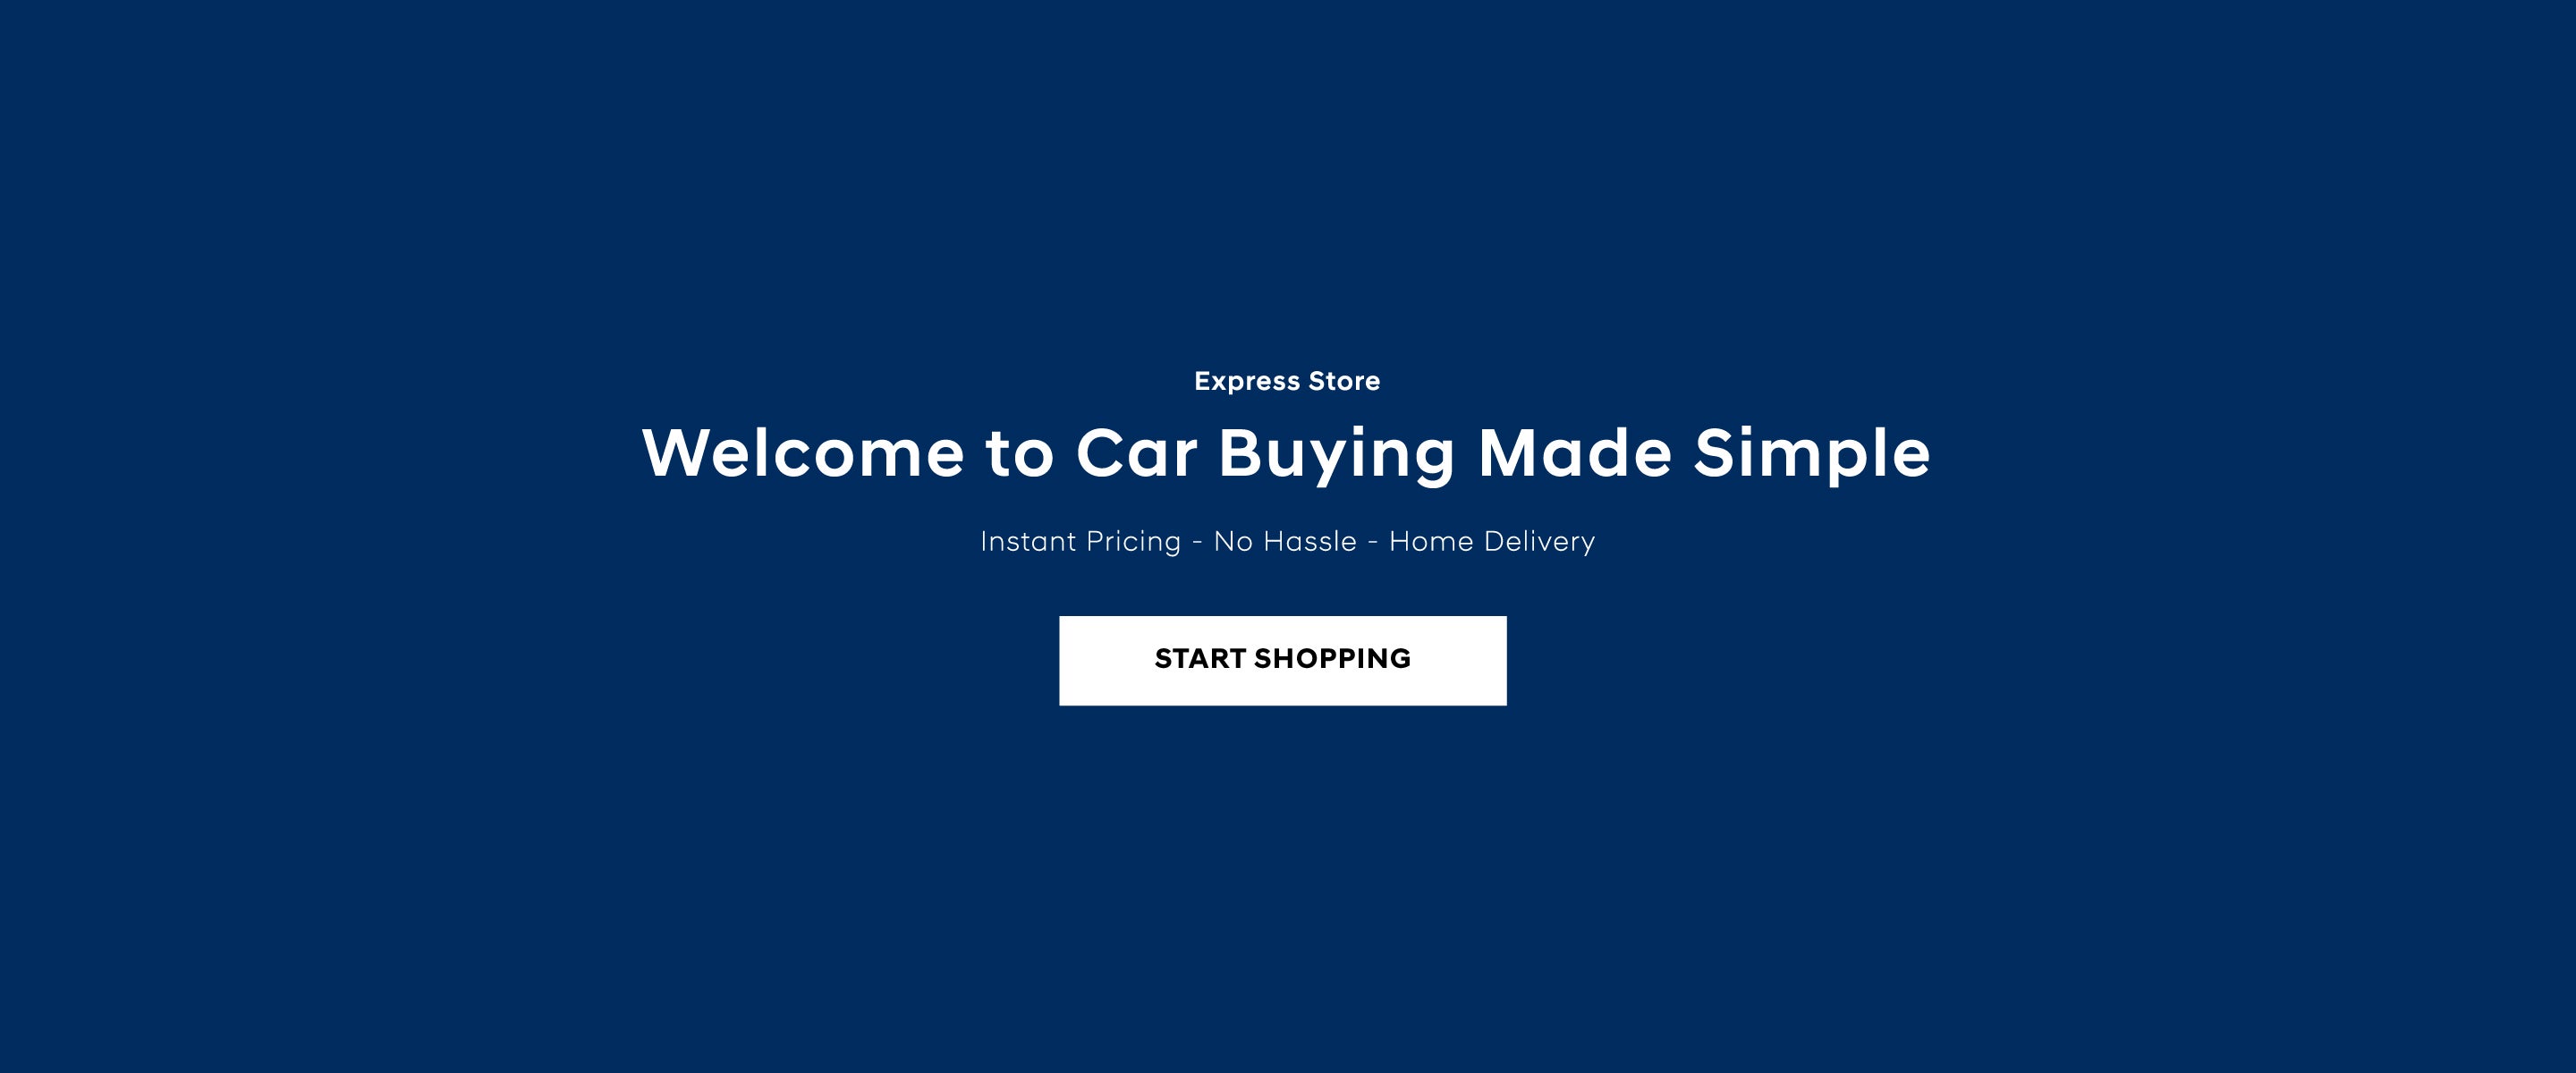 Express Store Car Buying Made Simple